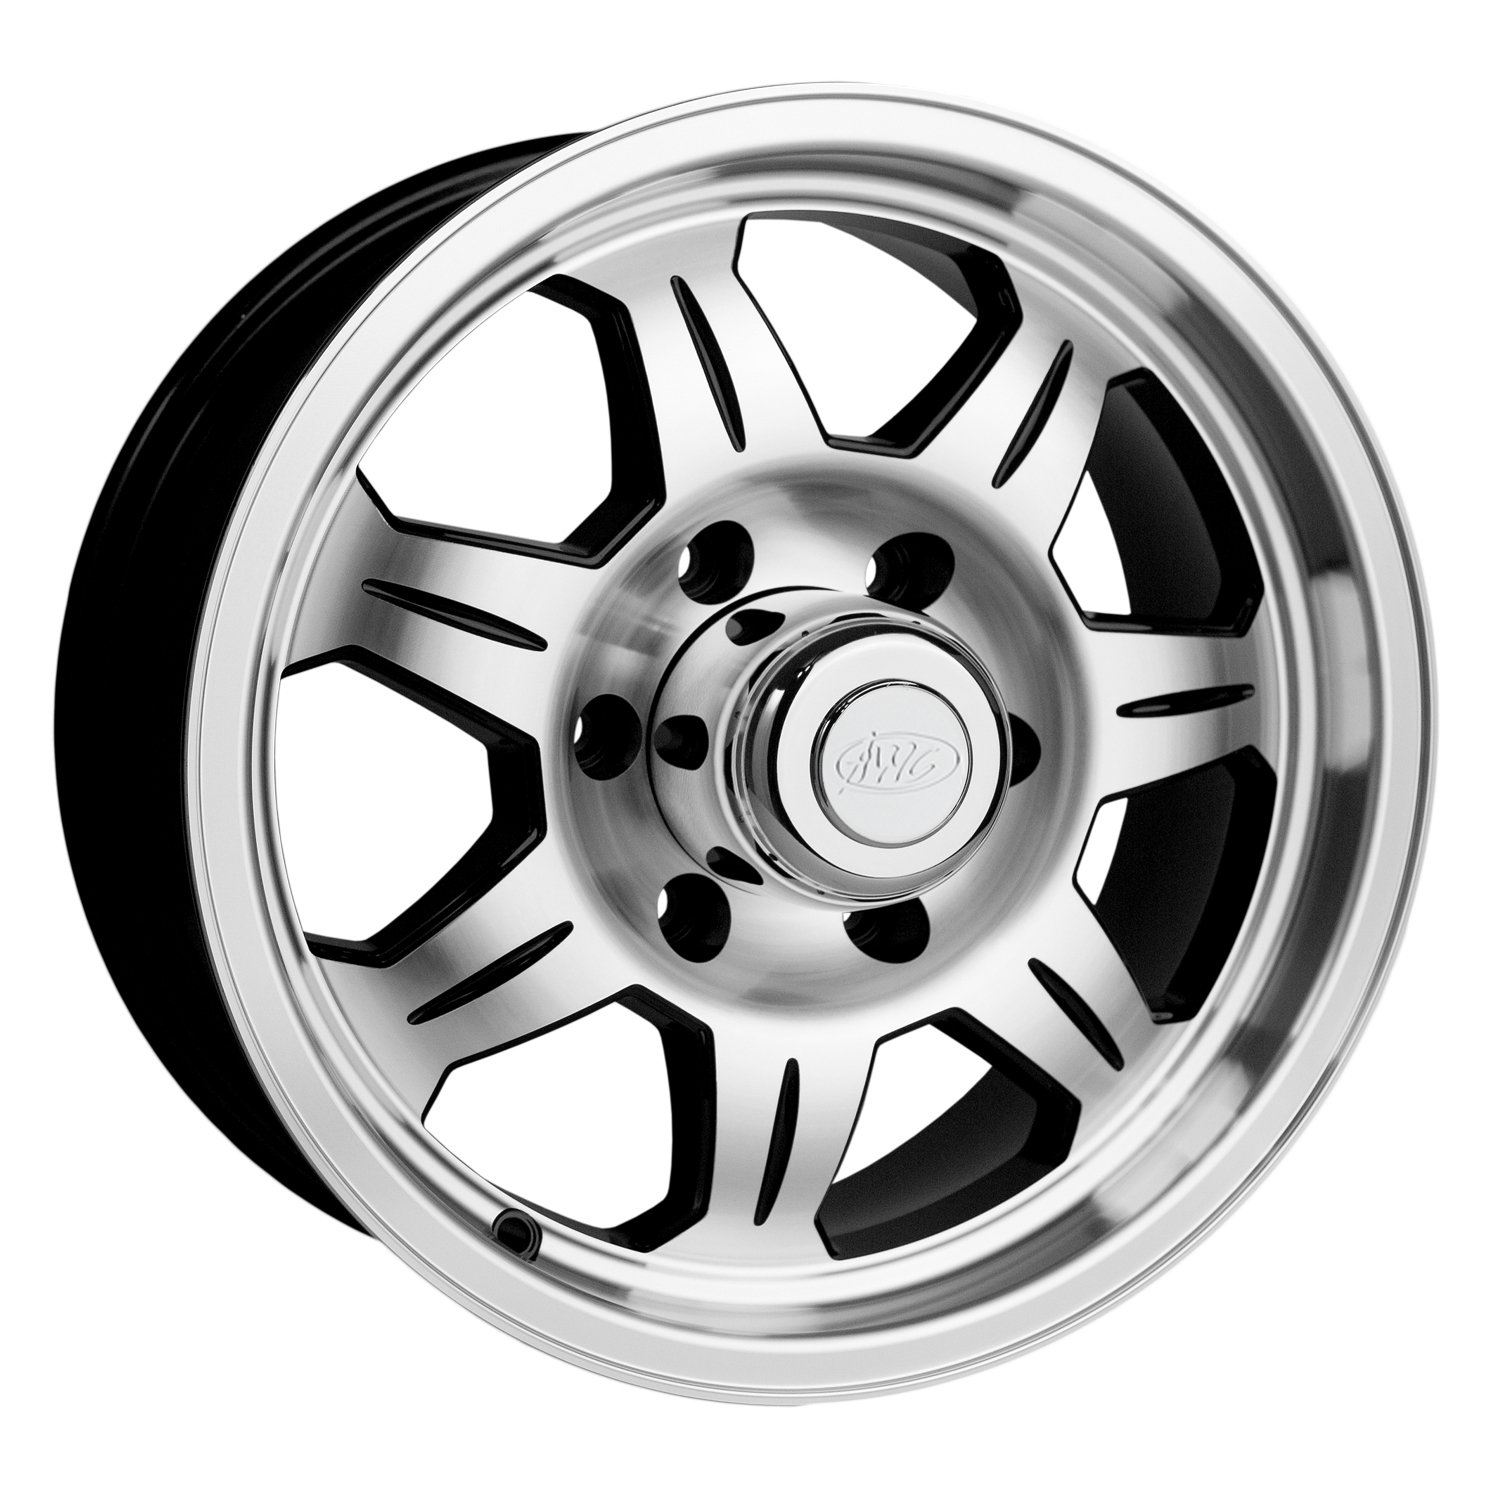 870 ELEMENT Trailer Wheel Size: 15 X 6" Bolt Pattern: 6 x 5.50" (139.70 mm) [Machined with Black Accents]